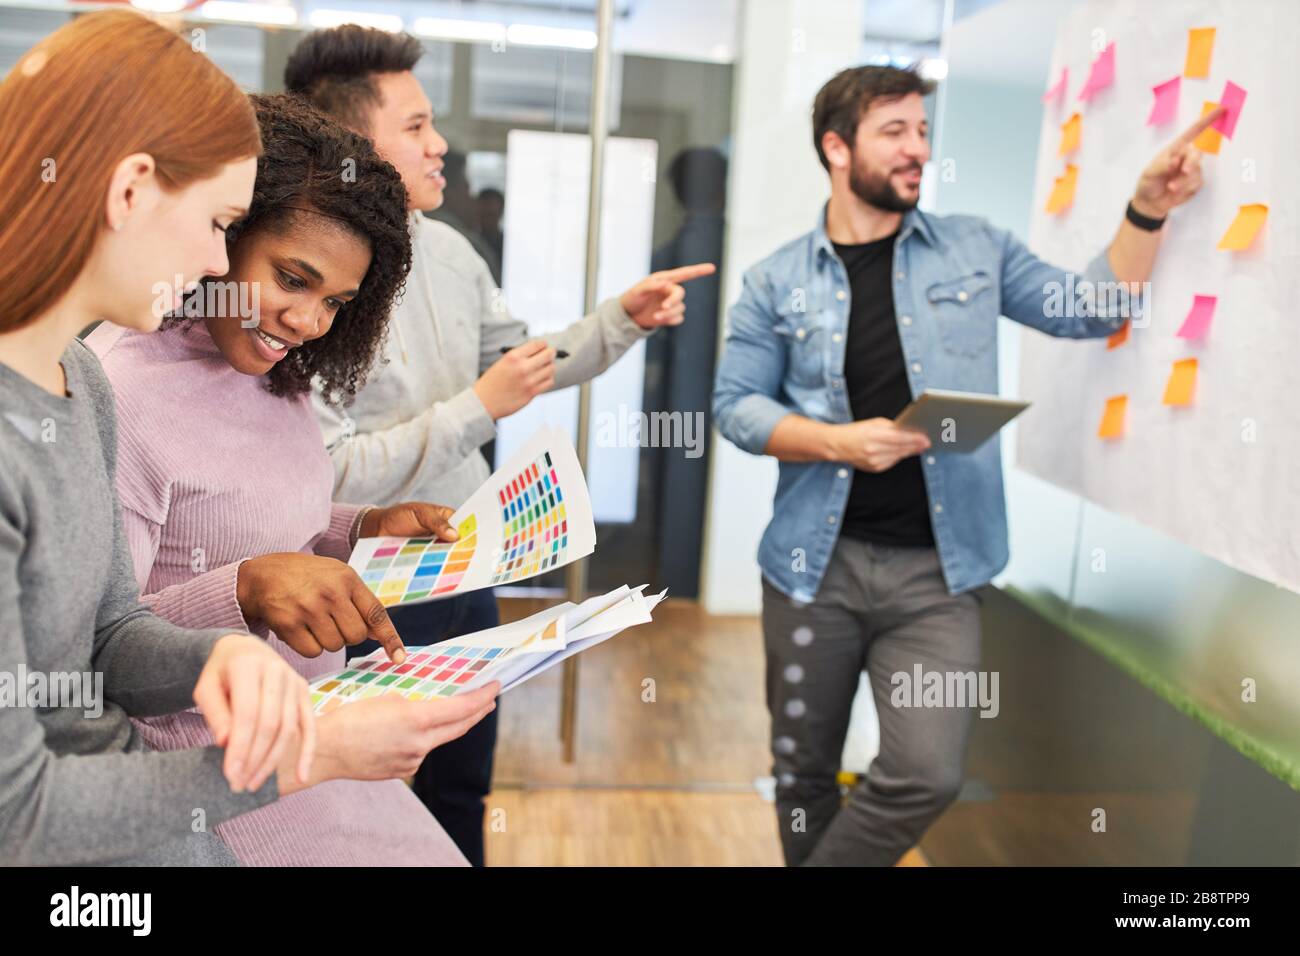 Creative start-up team brainstorming with sticky notes in a design agency Stock Photo